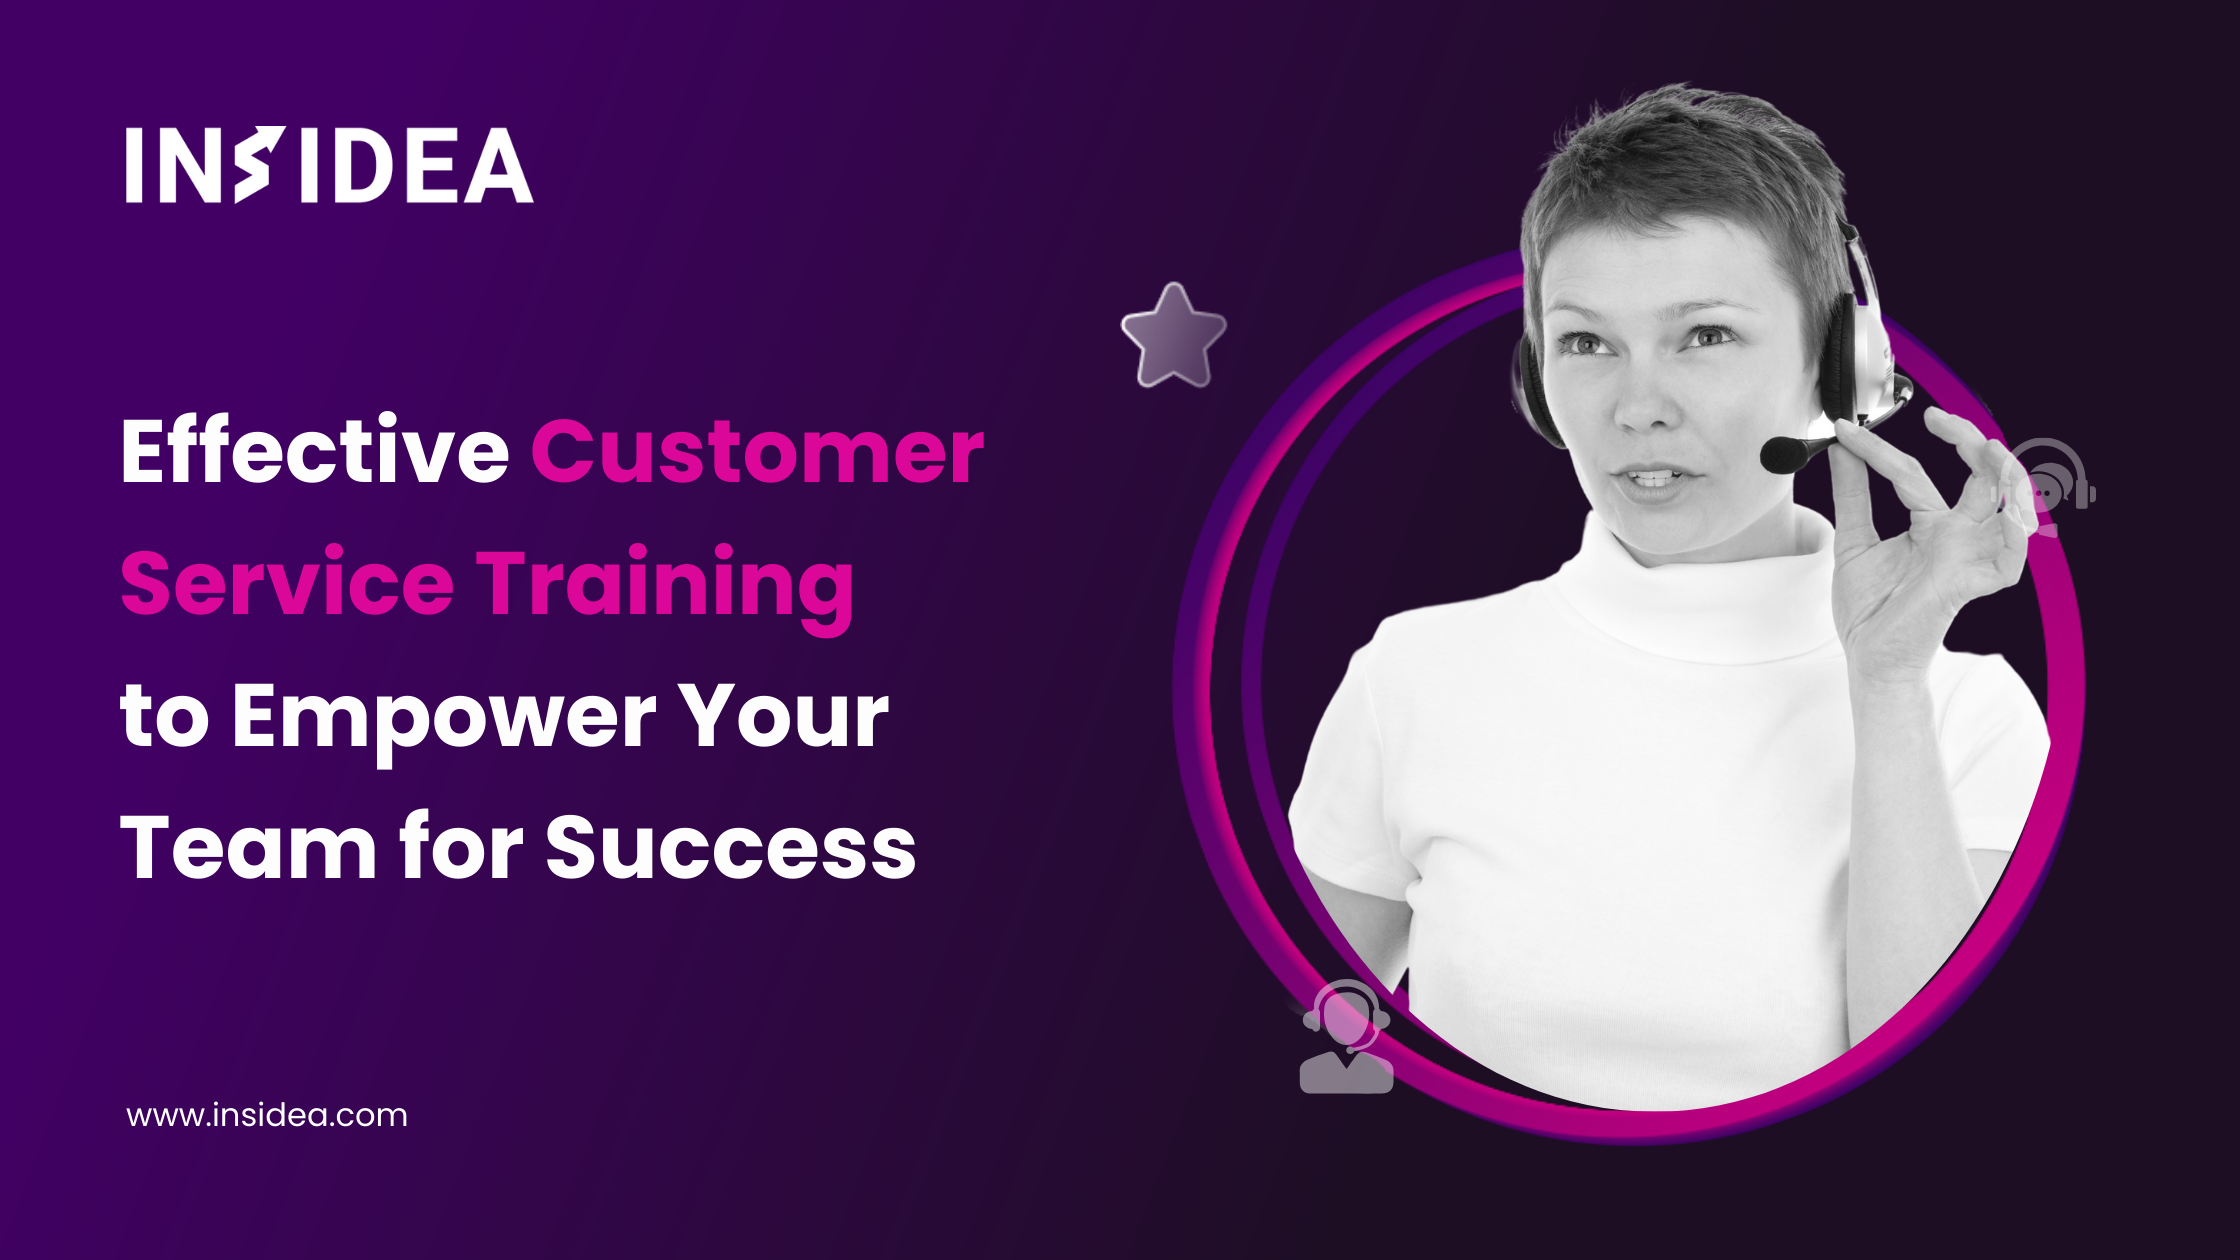 Effective Customer Service Training to Empower Your Team for Success